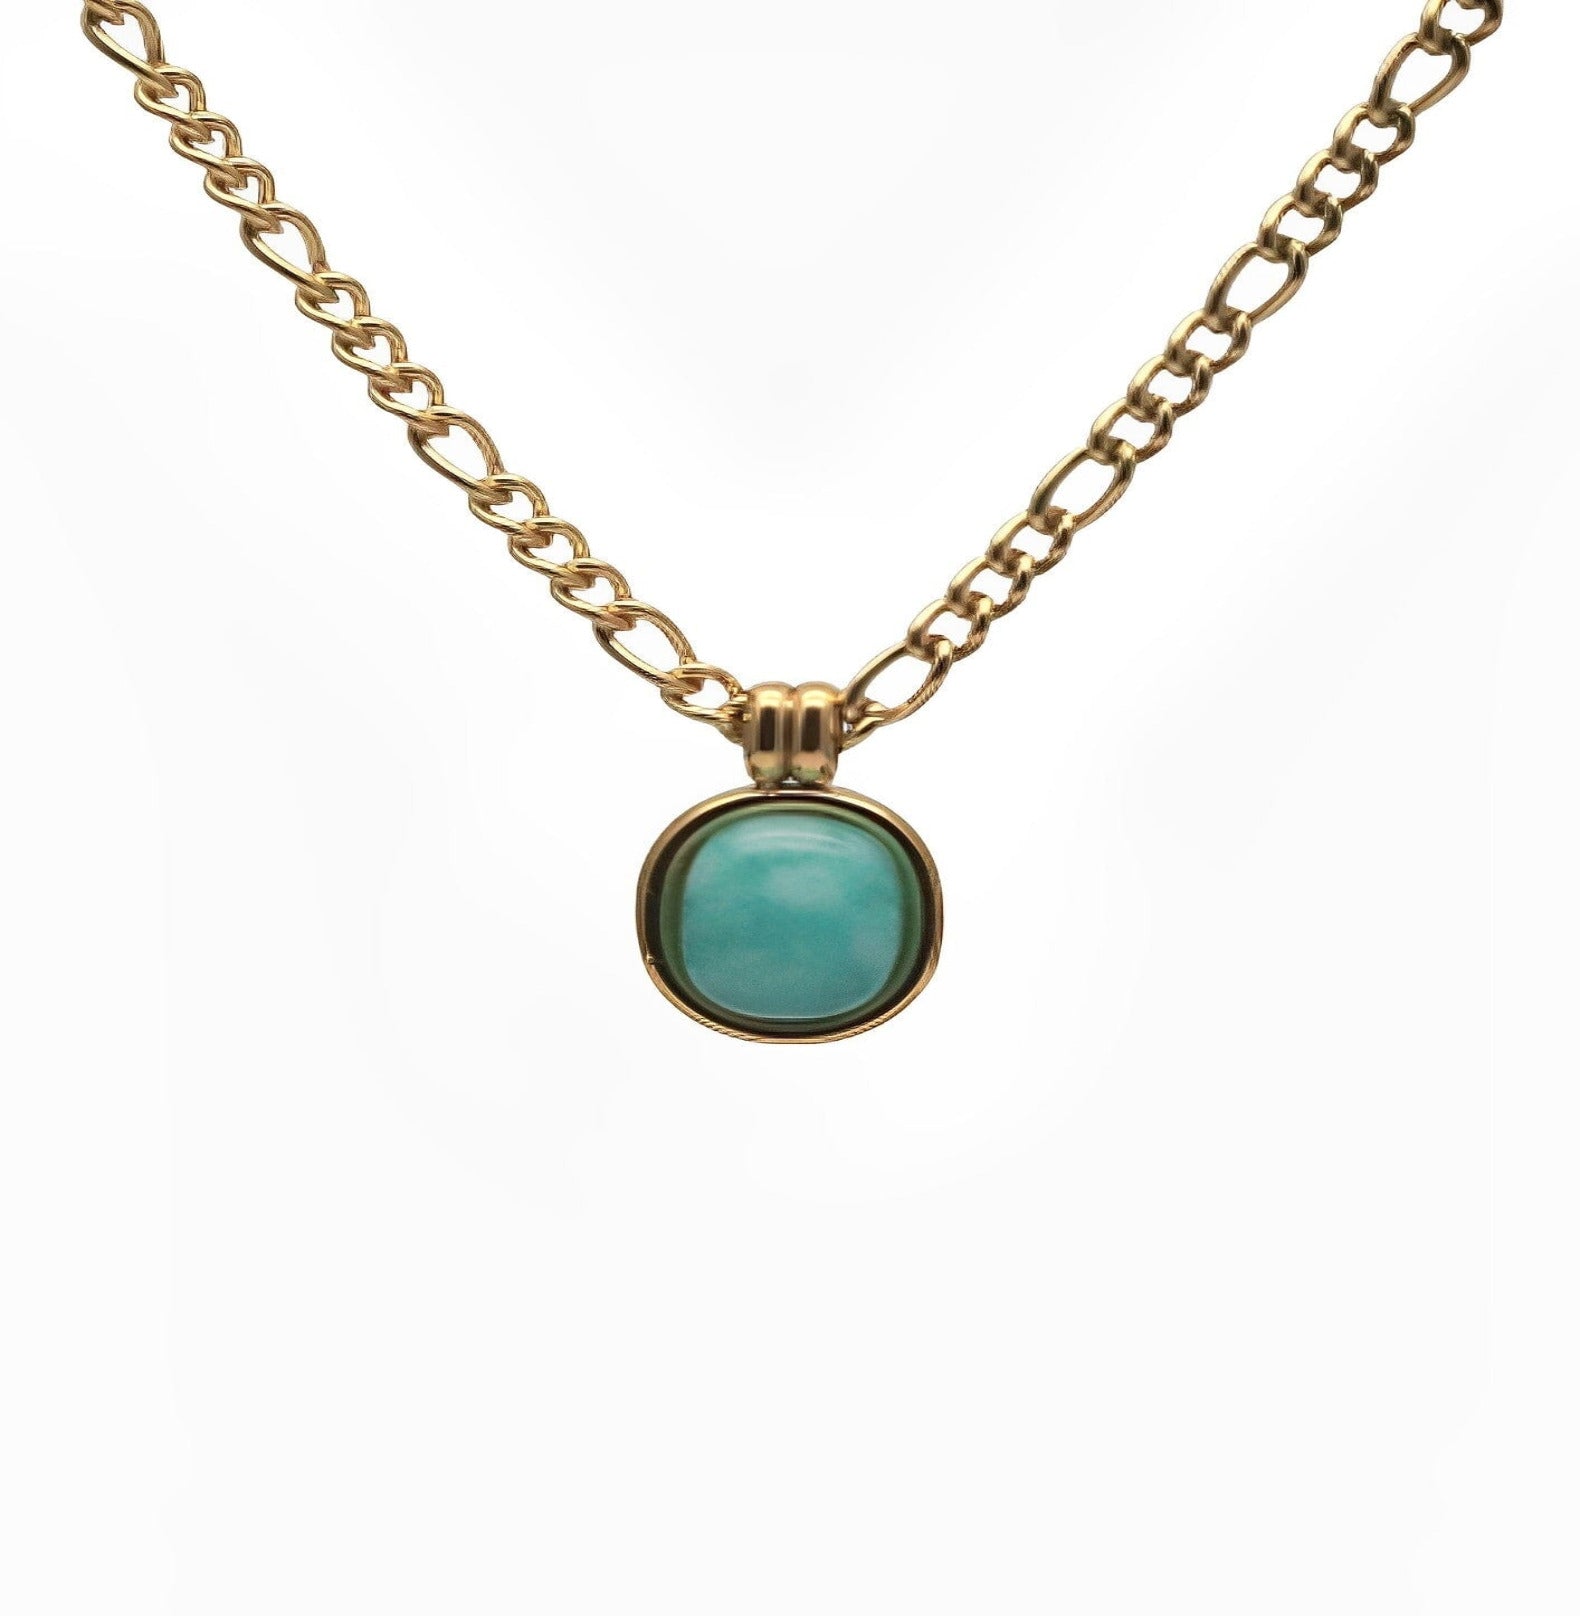 MINT GREEN NECKLACE neck Yubama Jewelry Online Store - The Elegant Designs of Gold and Silver ! 